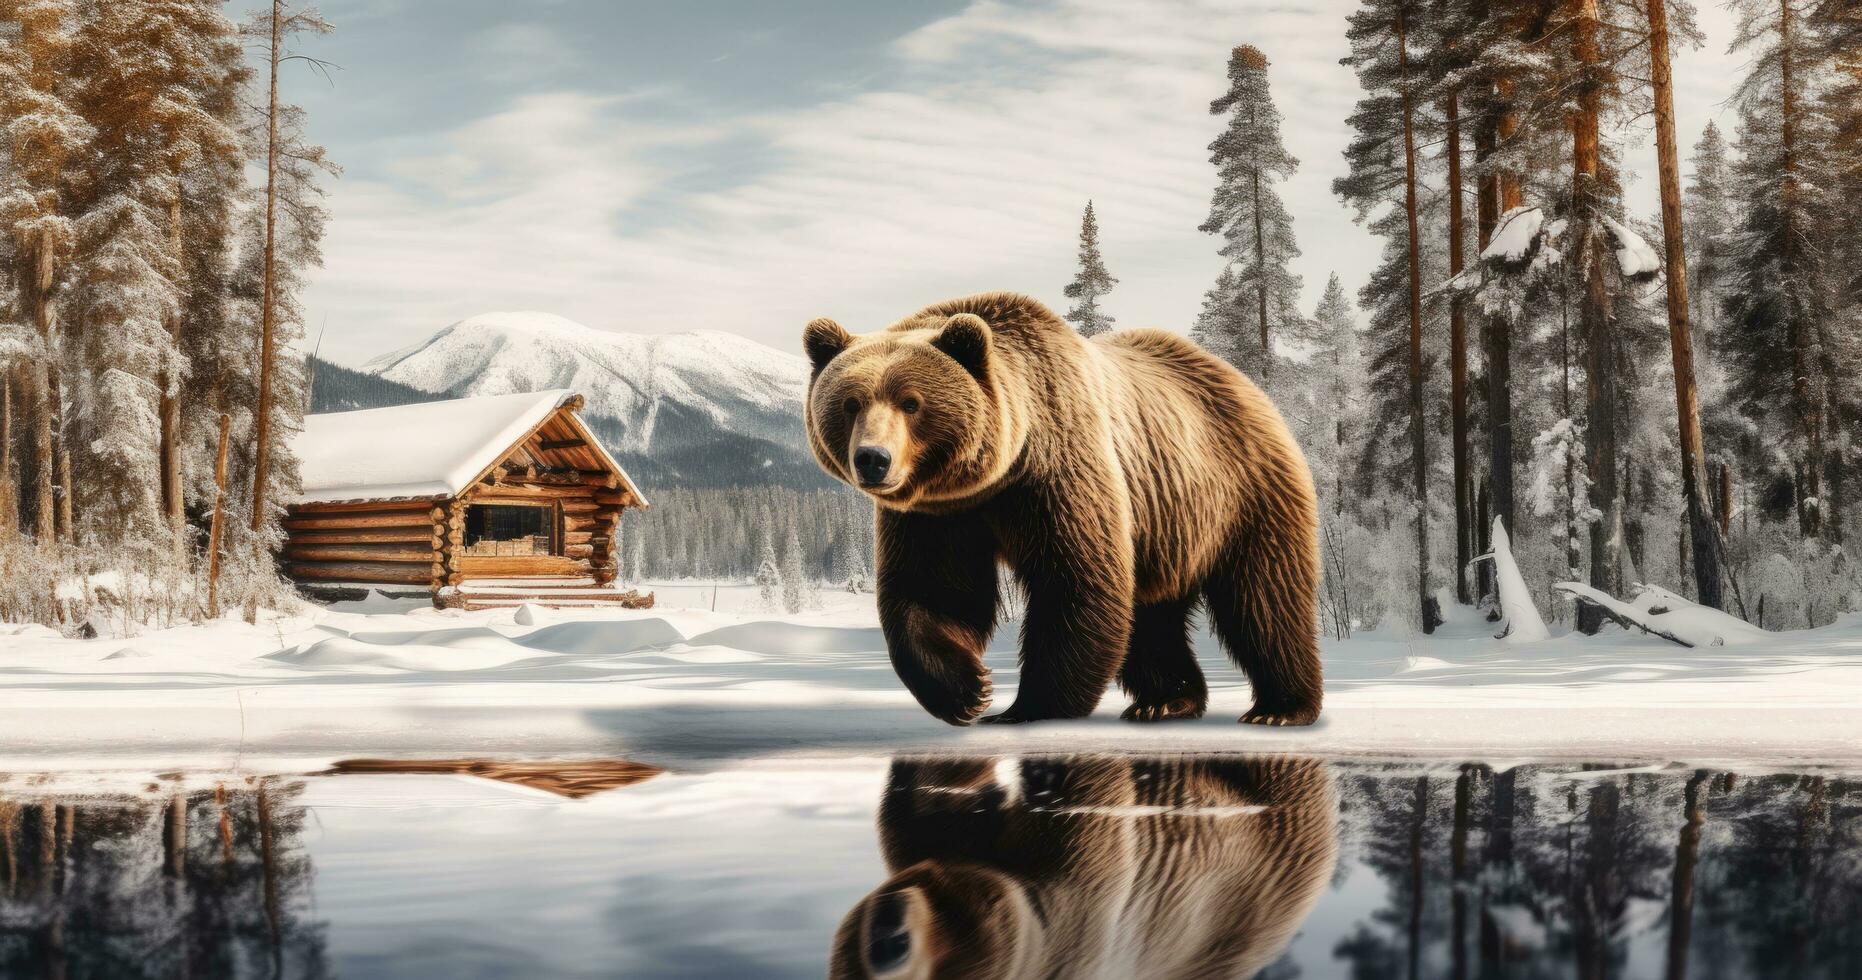 AI generated an image of a bear walking next to a log cabin photo